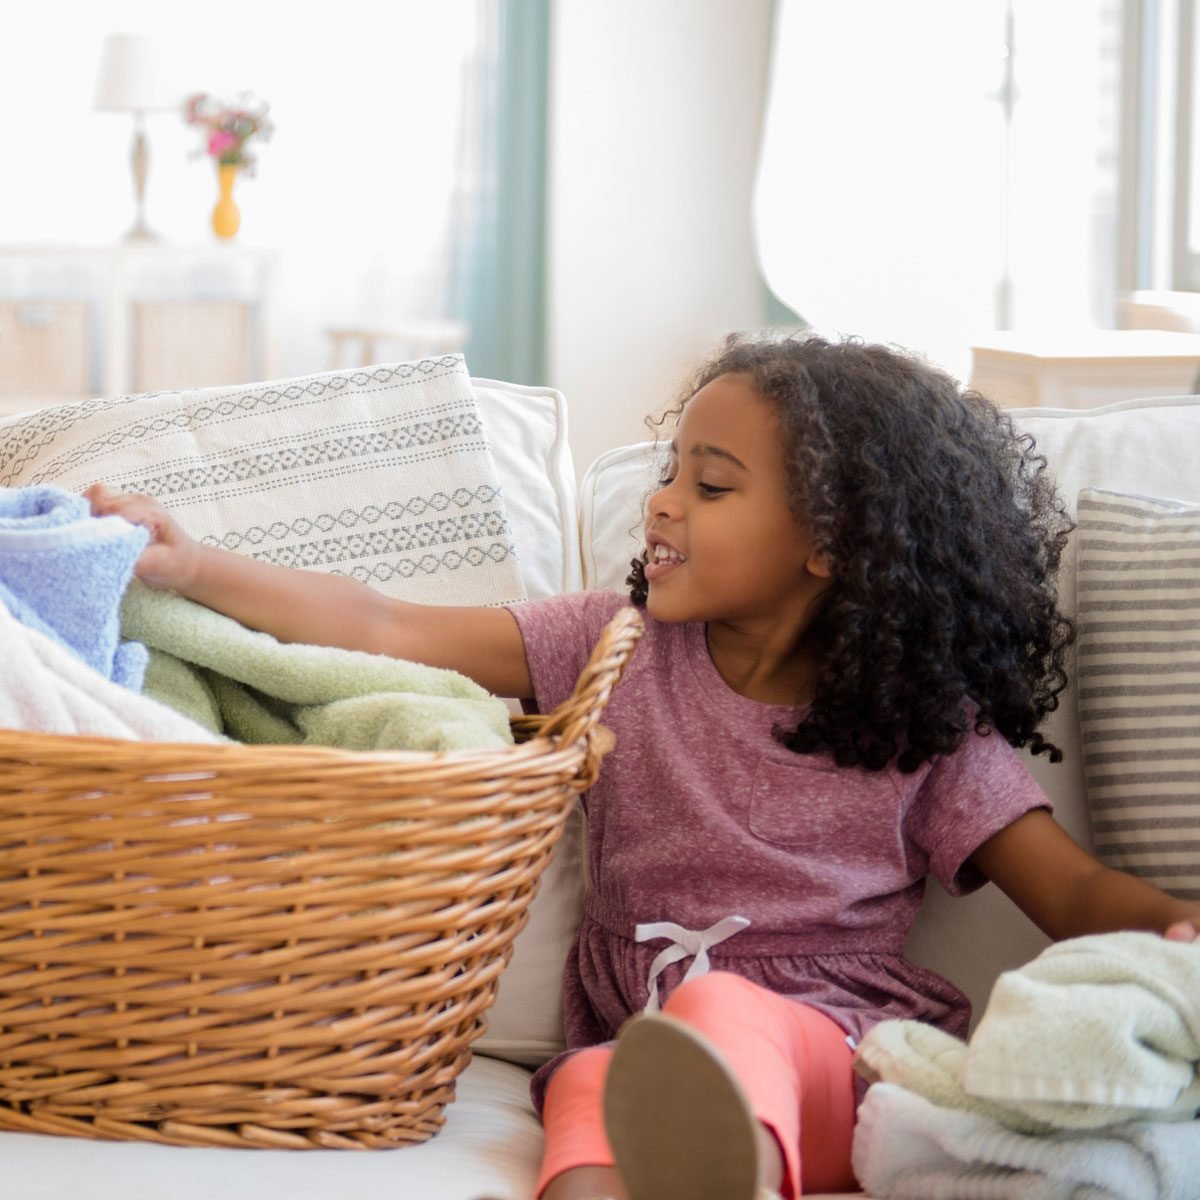 The Ultimate List of Age-Appropriate Chores | The Family Handyman